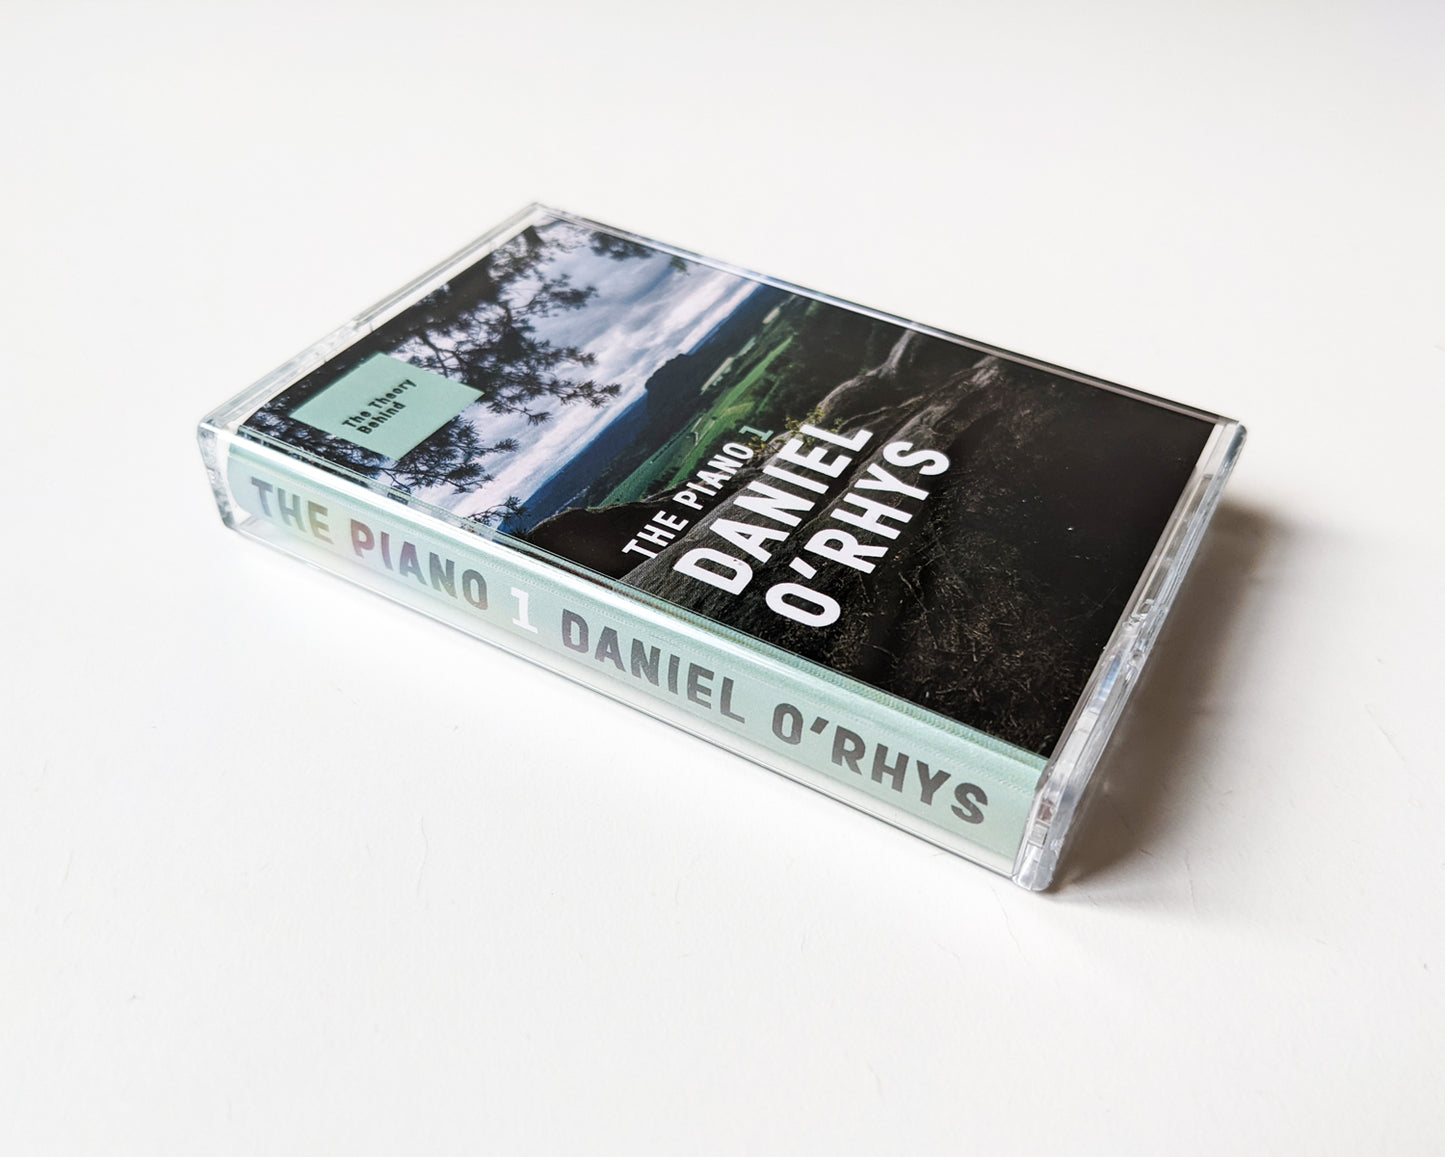 Daniel O'Rhys X The Theory Behind - The Piano 1 (TAPE)